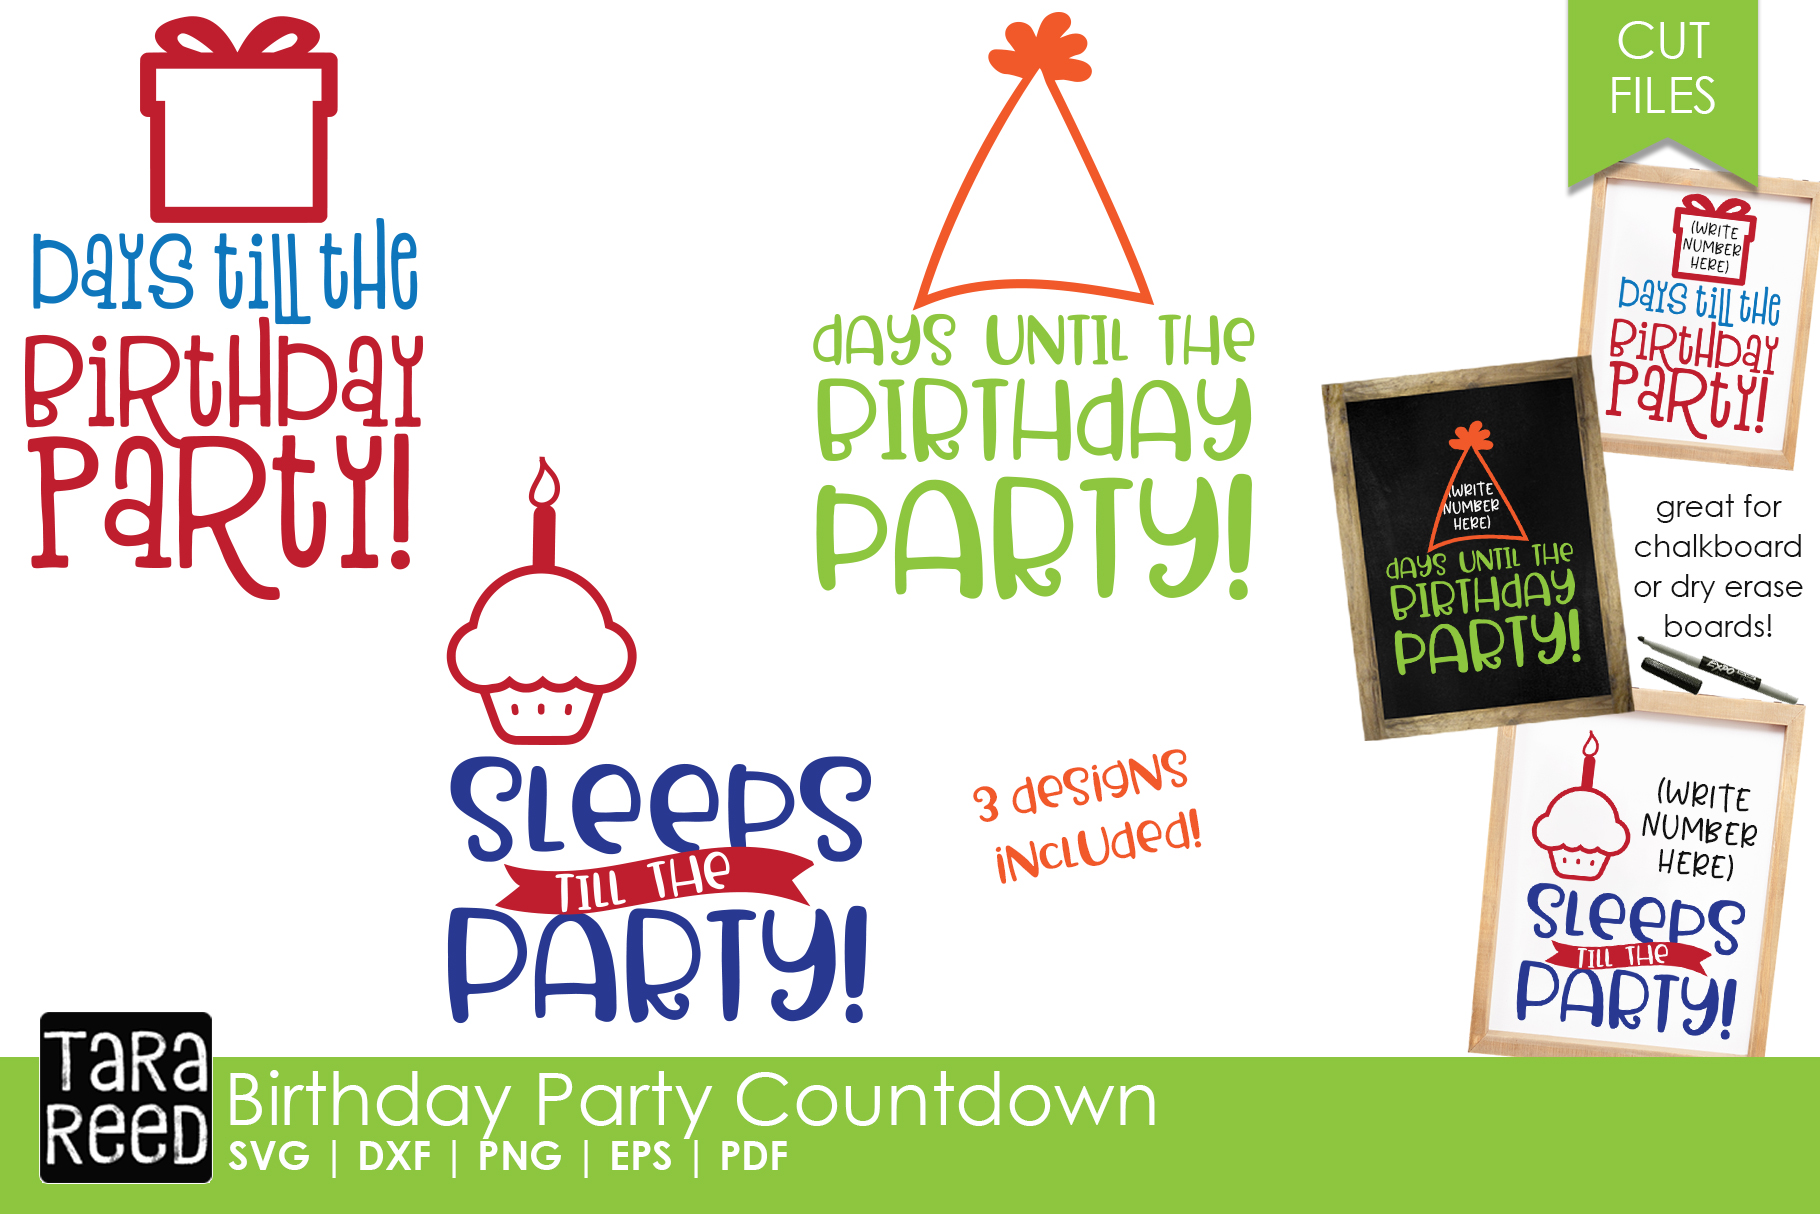 Birthday Party Countdown - Birthday SVG Files for Crafters (142400) | Cut Files | Design Bundles